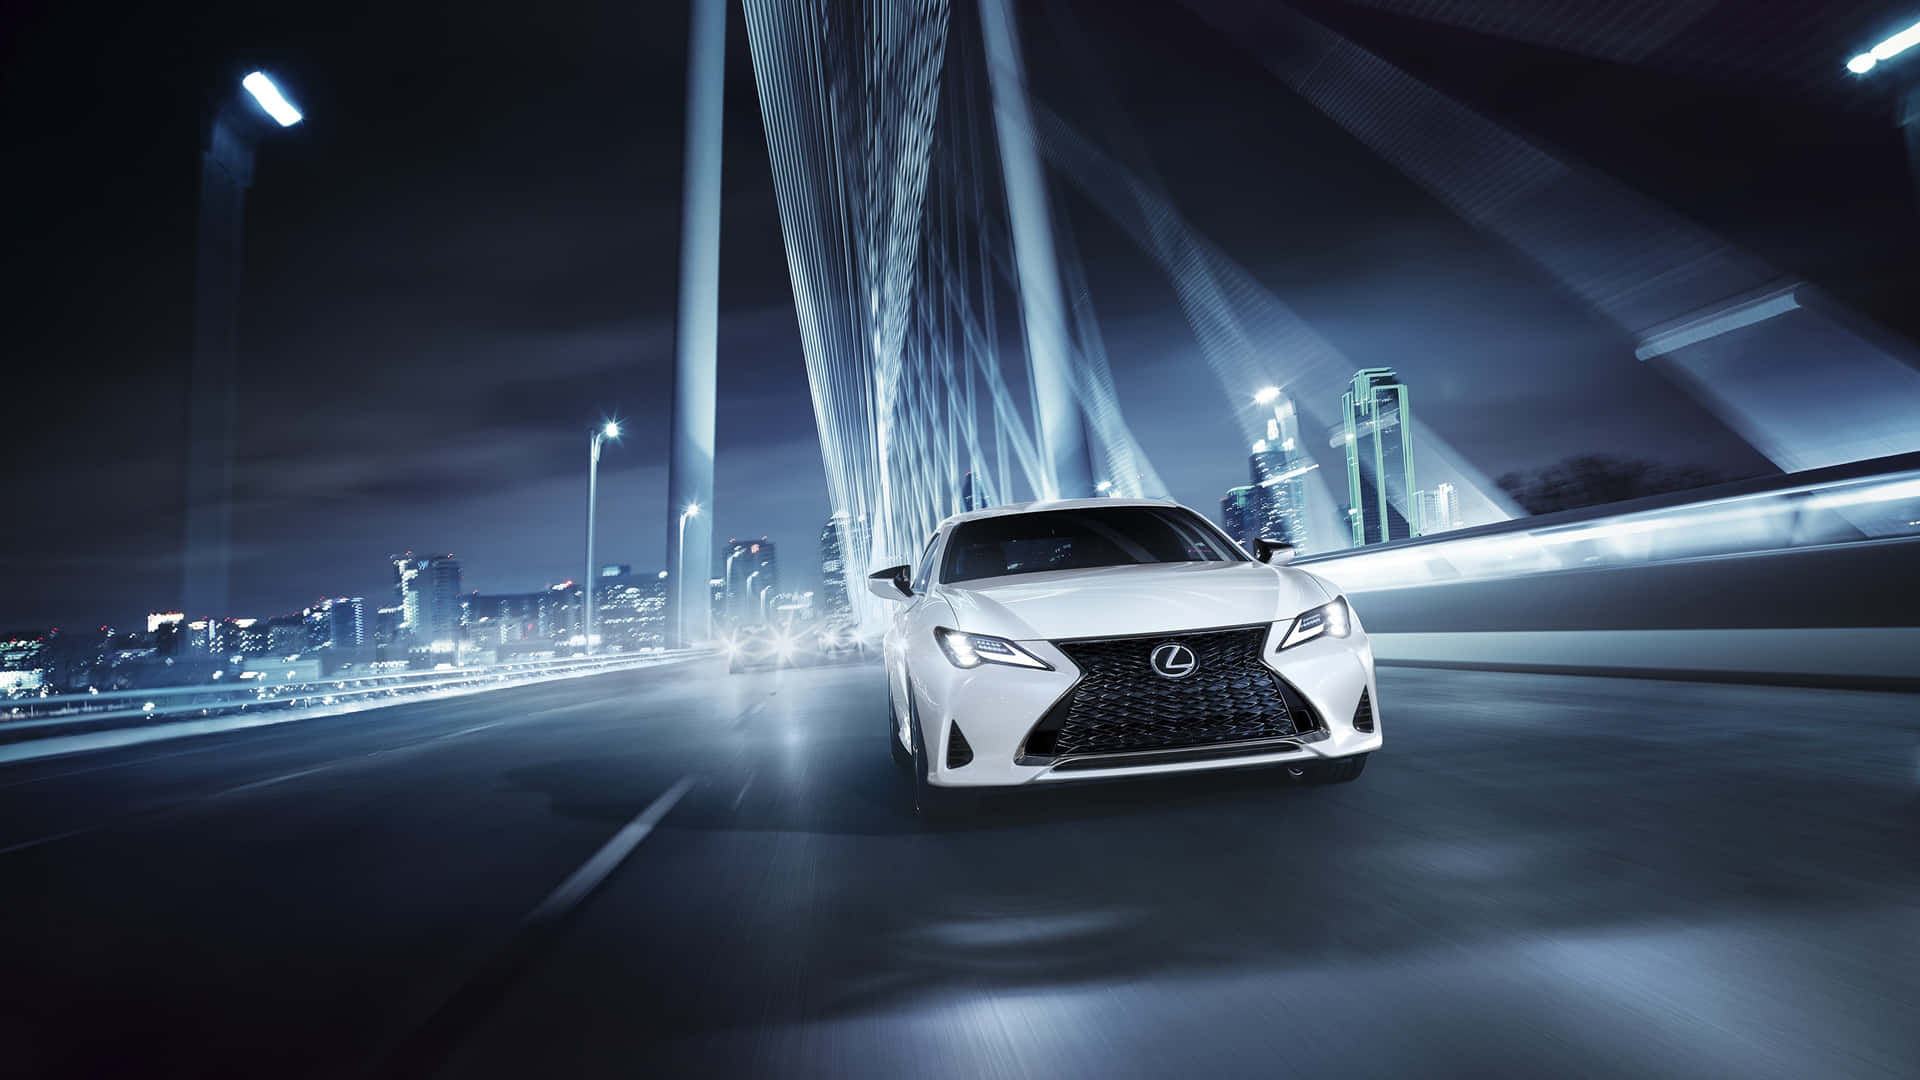 The White Lexus Cx Is Driving On A Bridge At Night Wallpaper